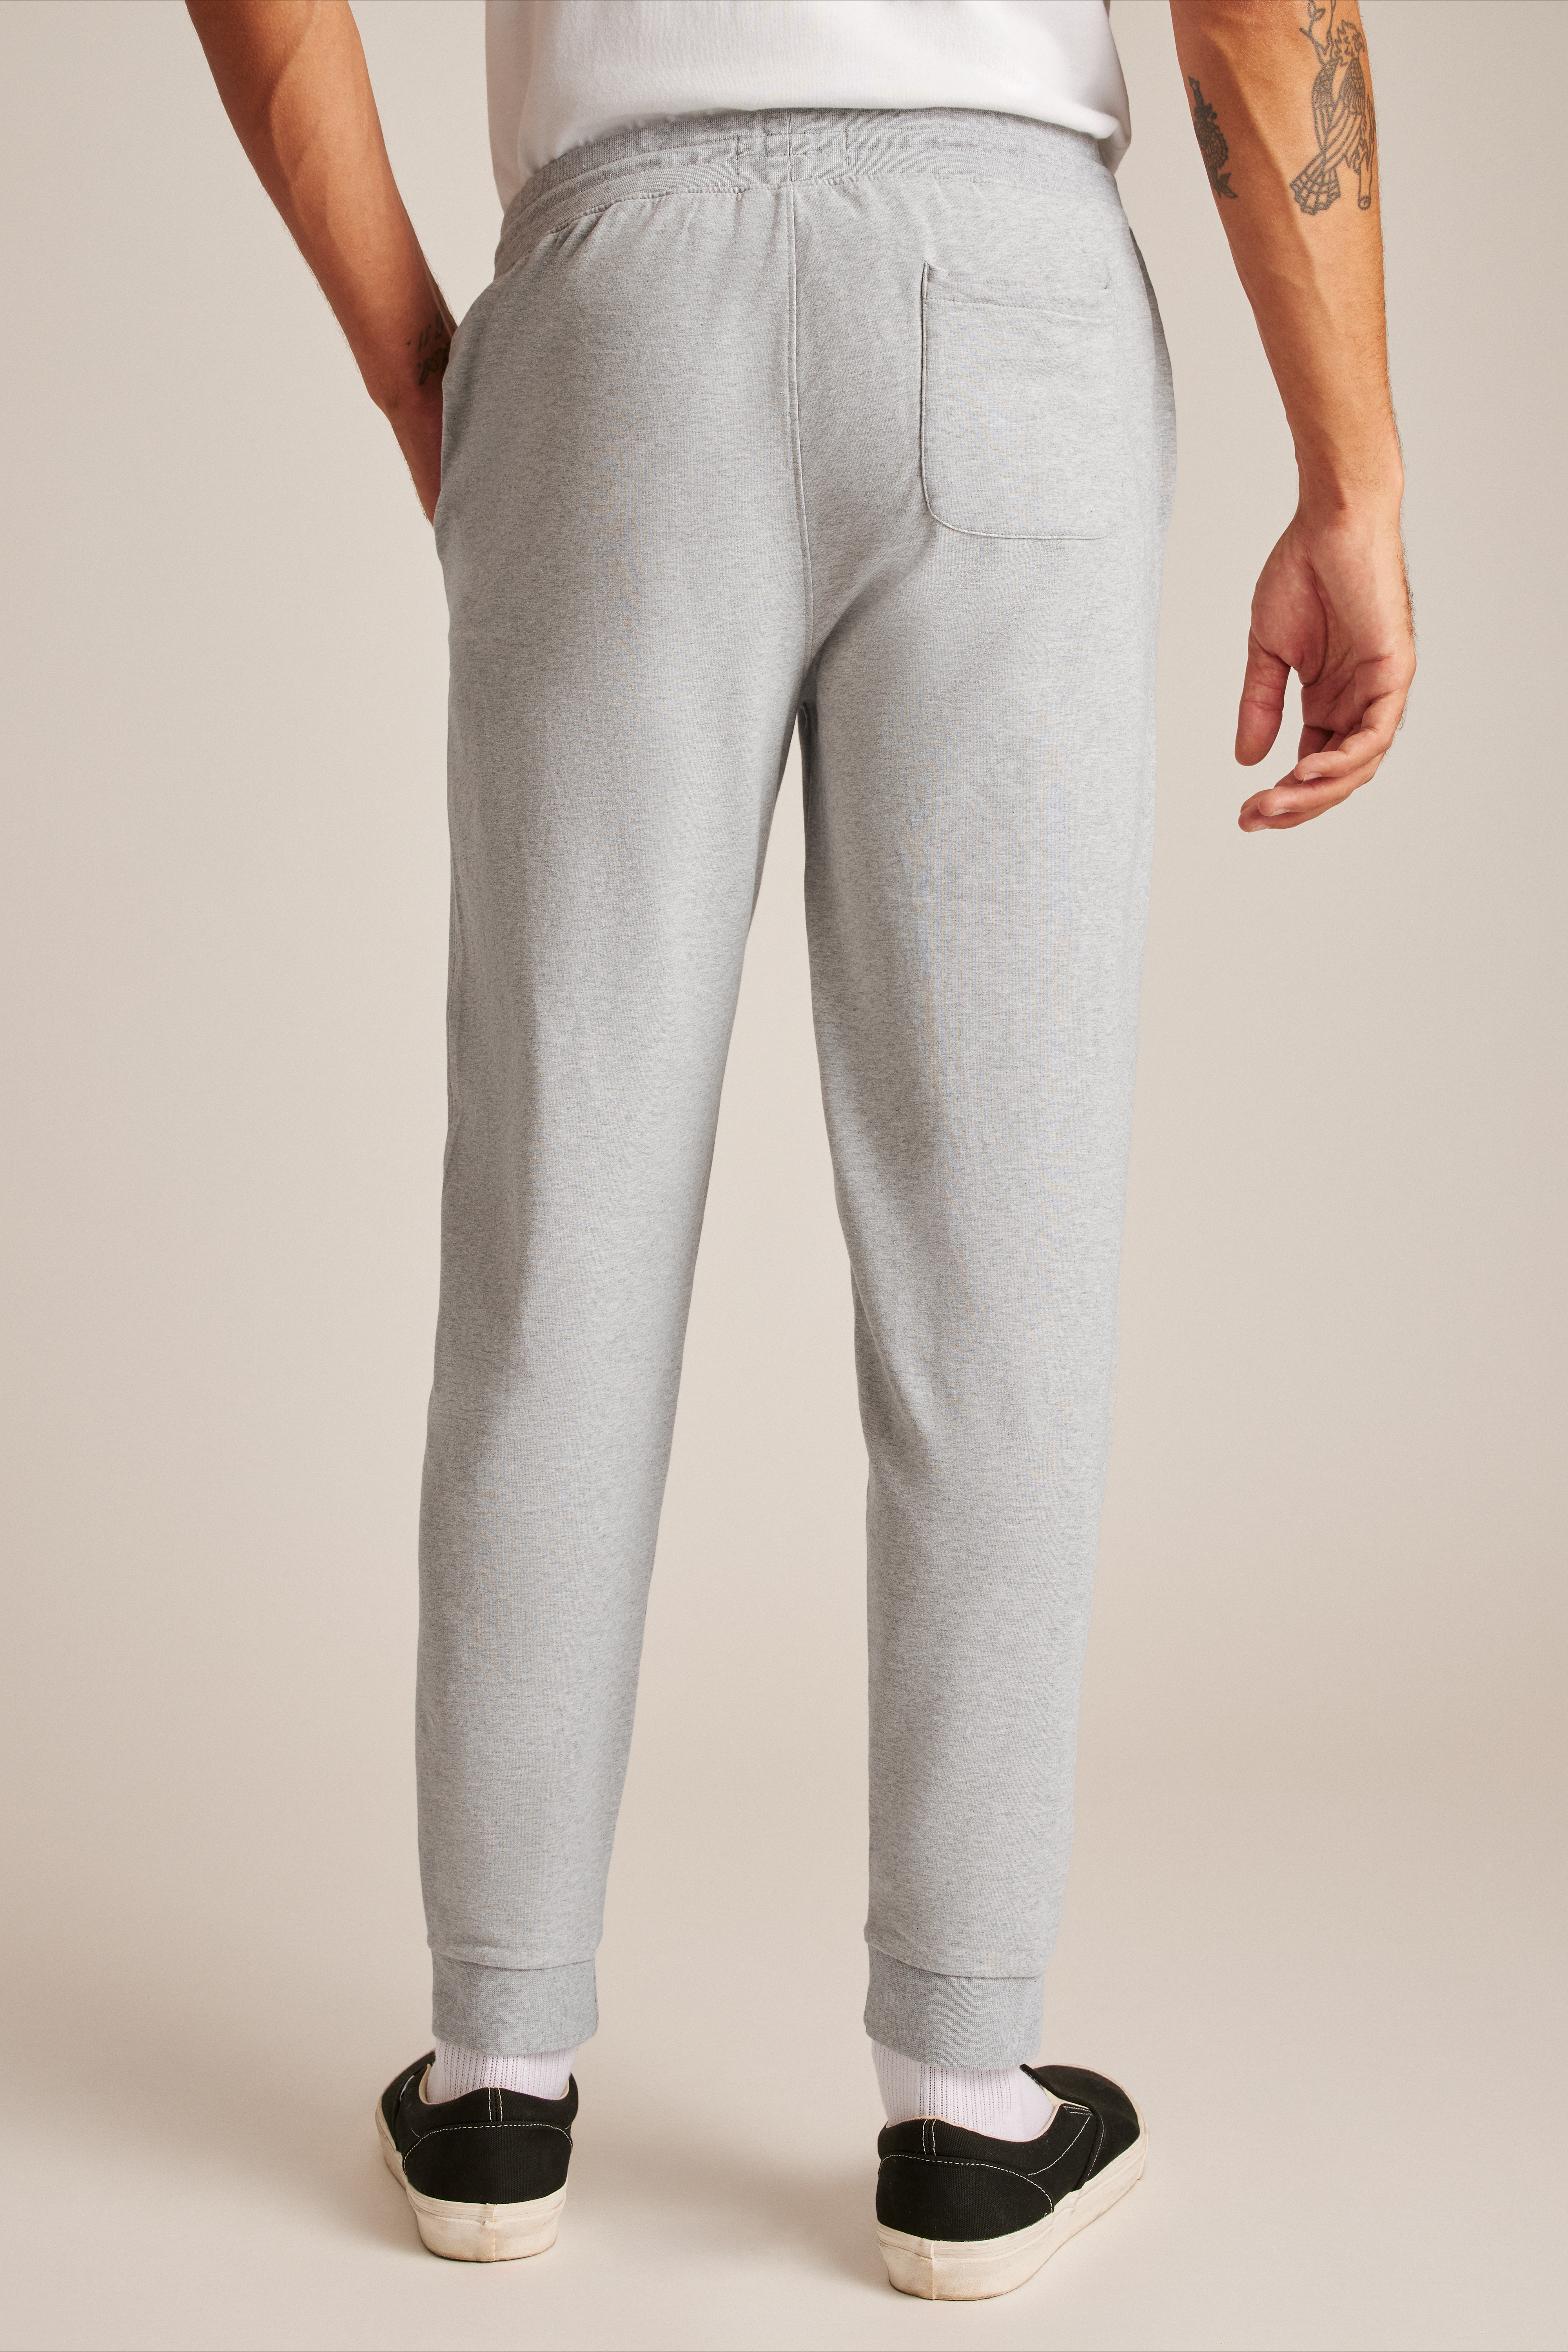 Stretch French Terry Sweatpant | Bonobos